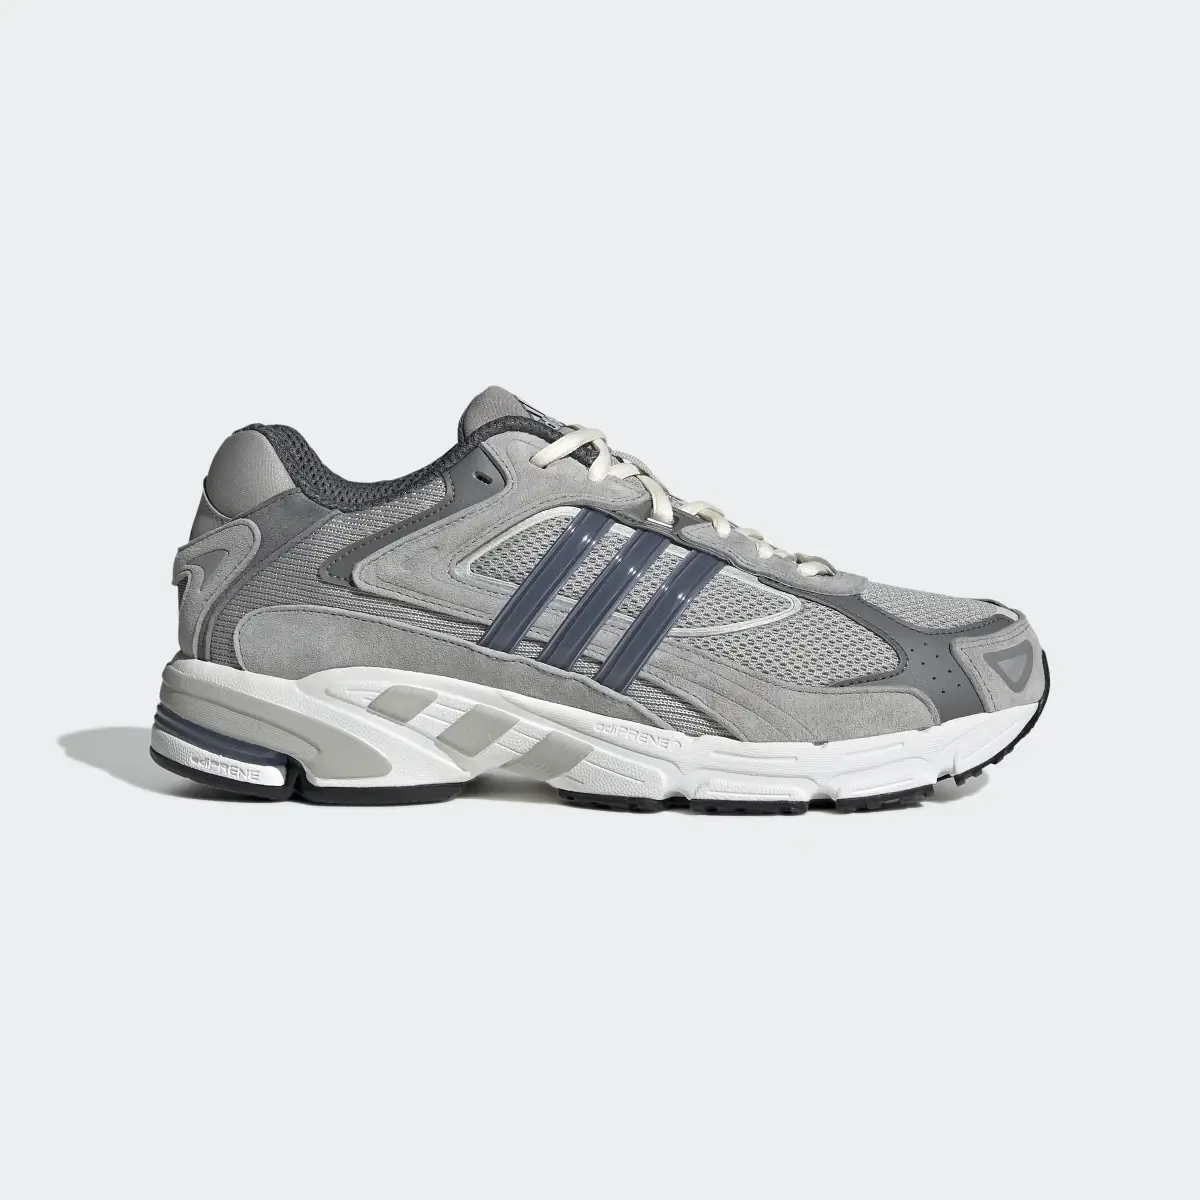 Adidas Chaussure Response CL. 2